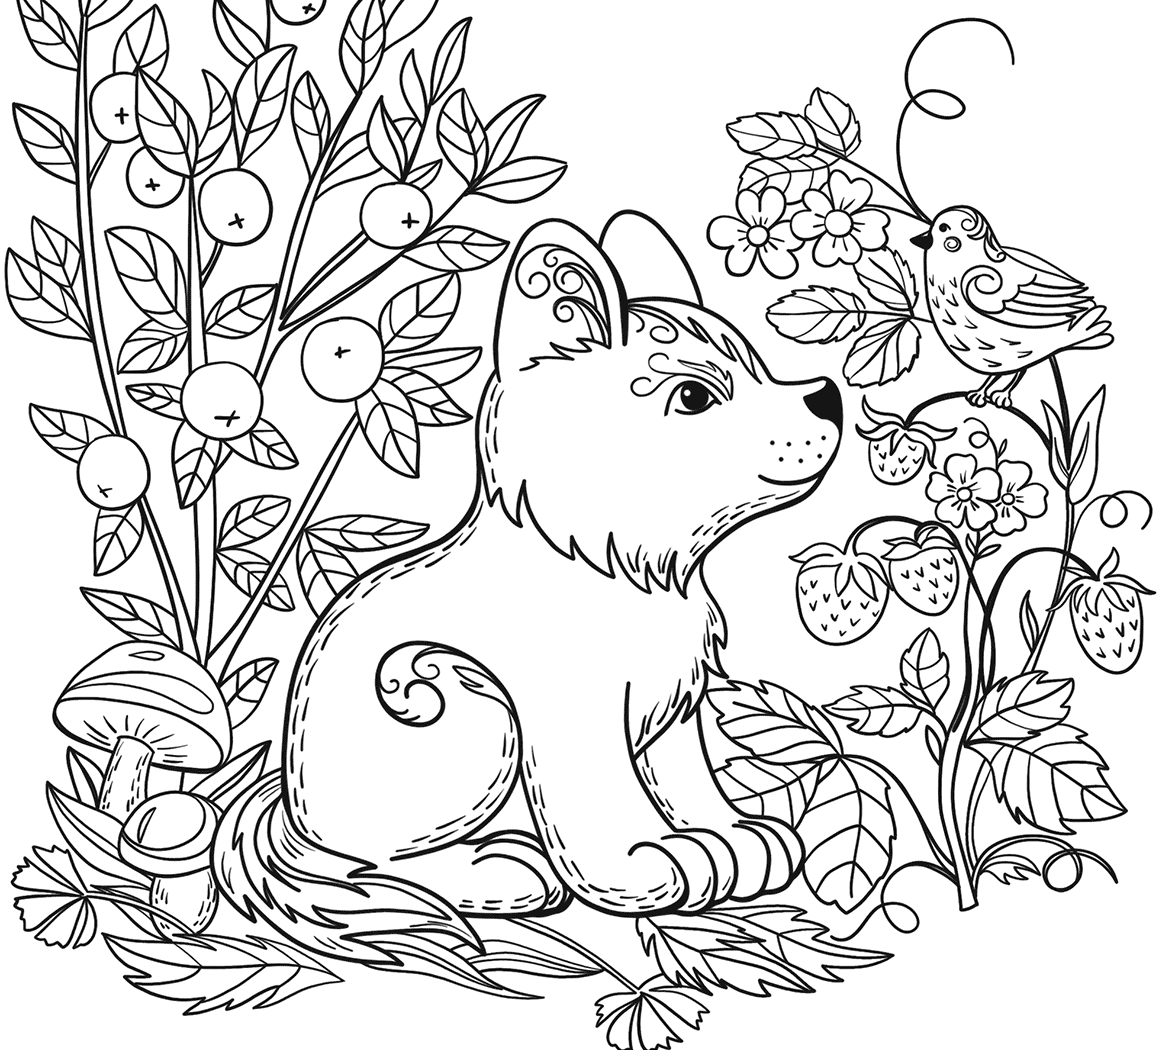 free-wild-animal-coloring-pages-at-getcolorings-free-printable-colorings-pages-to-print